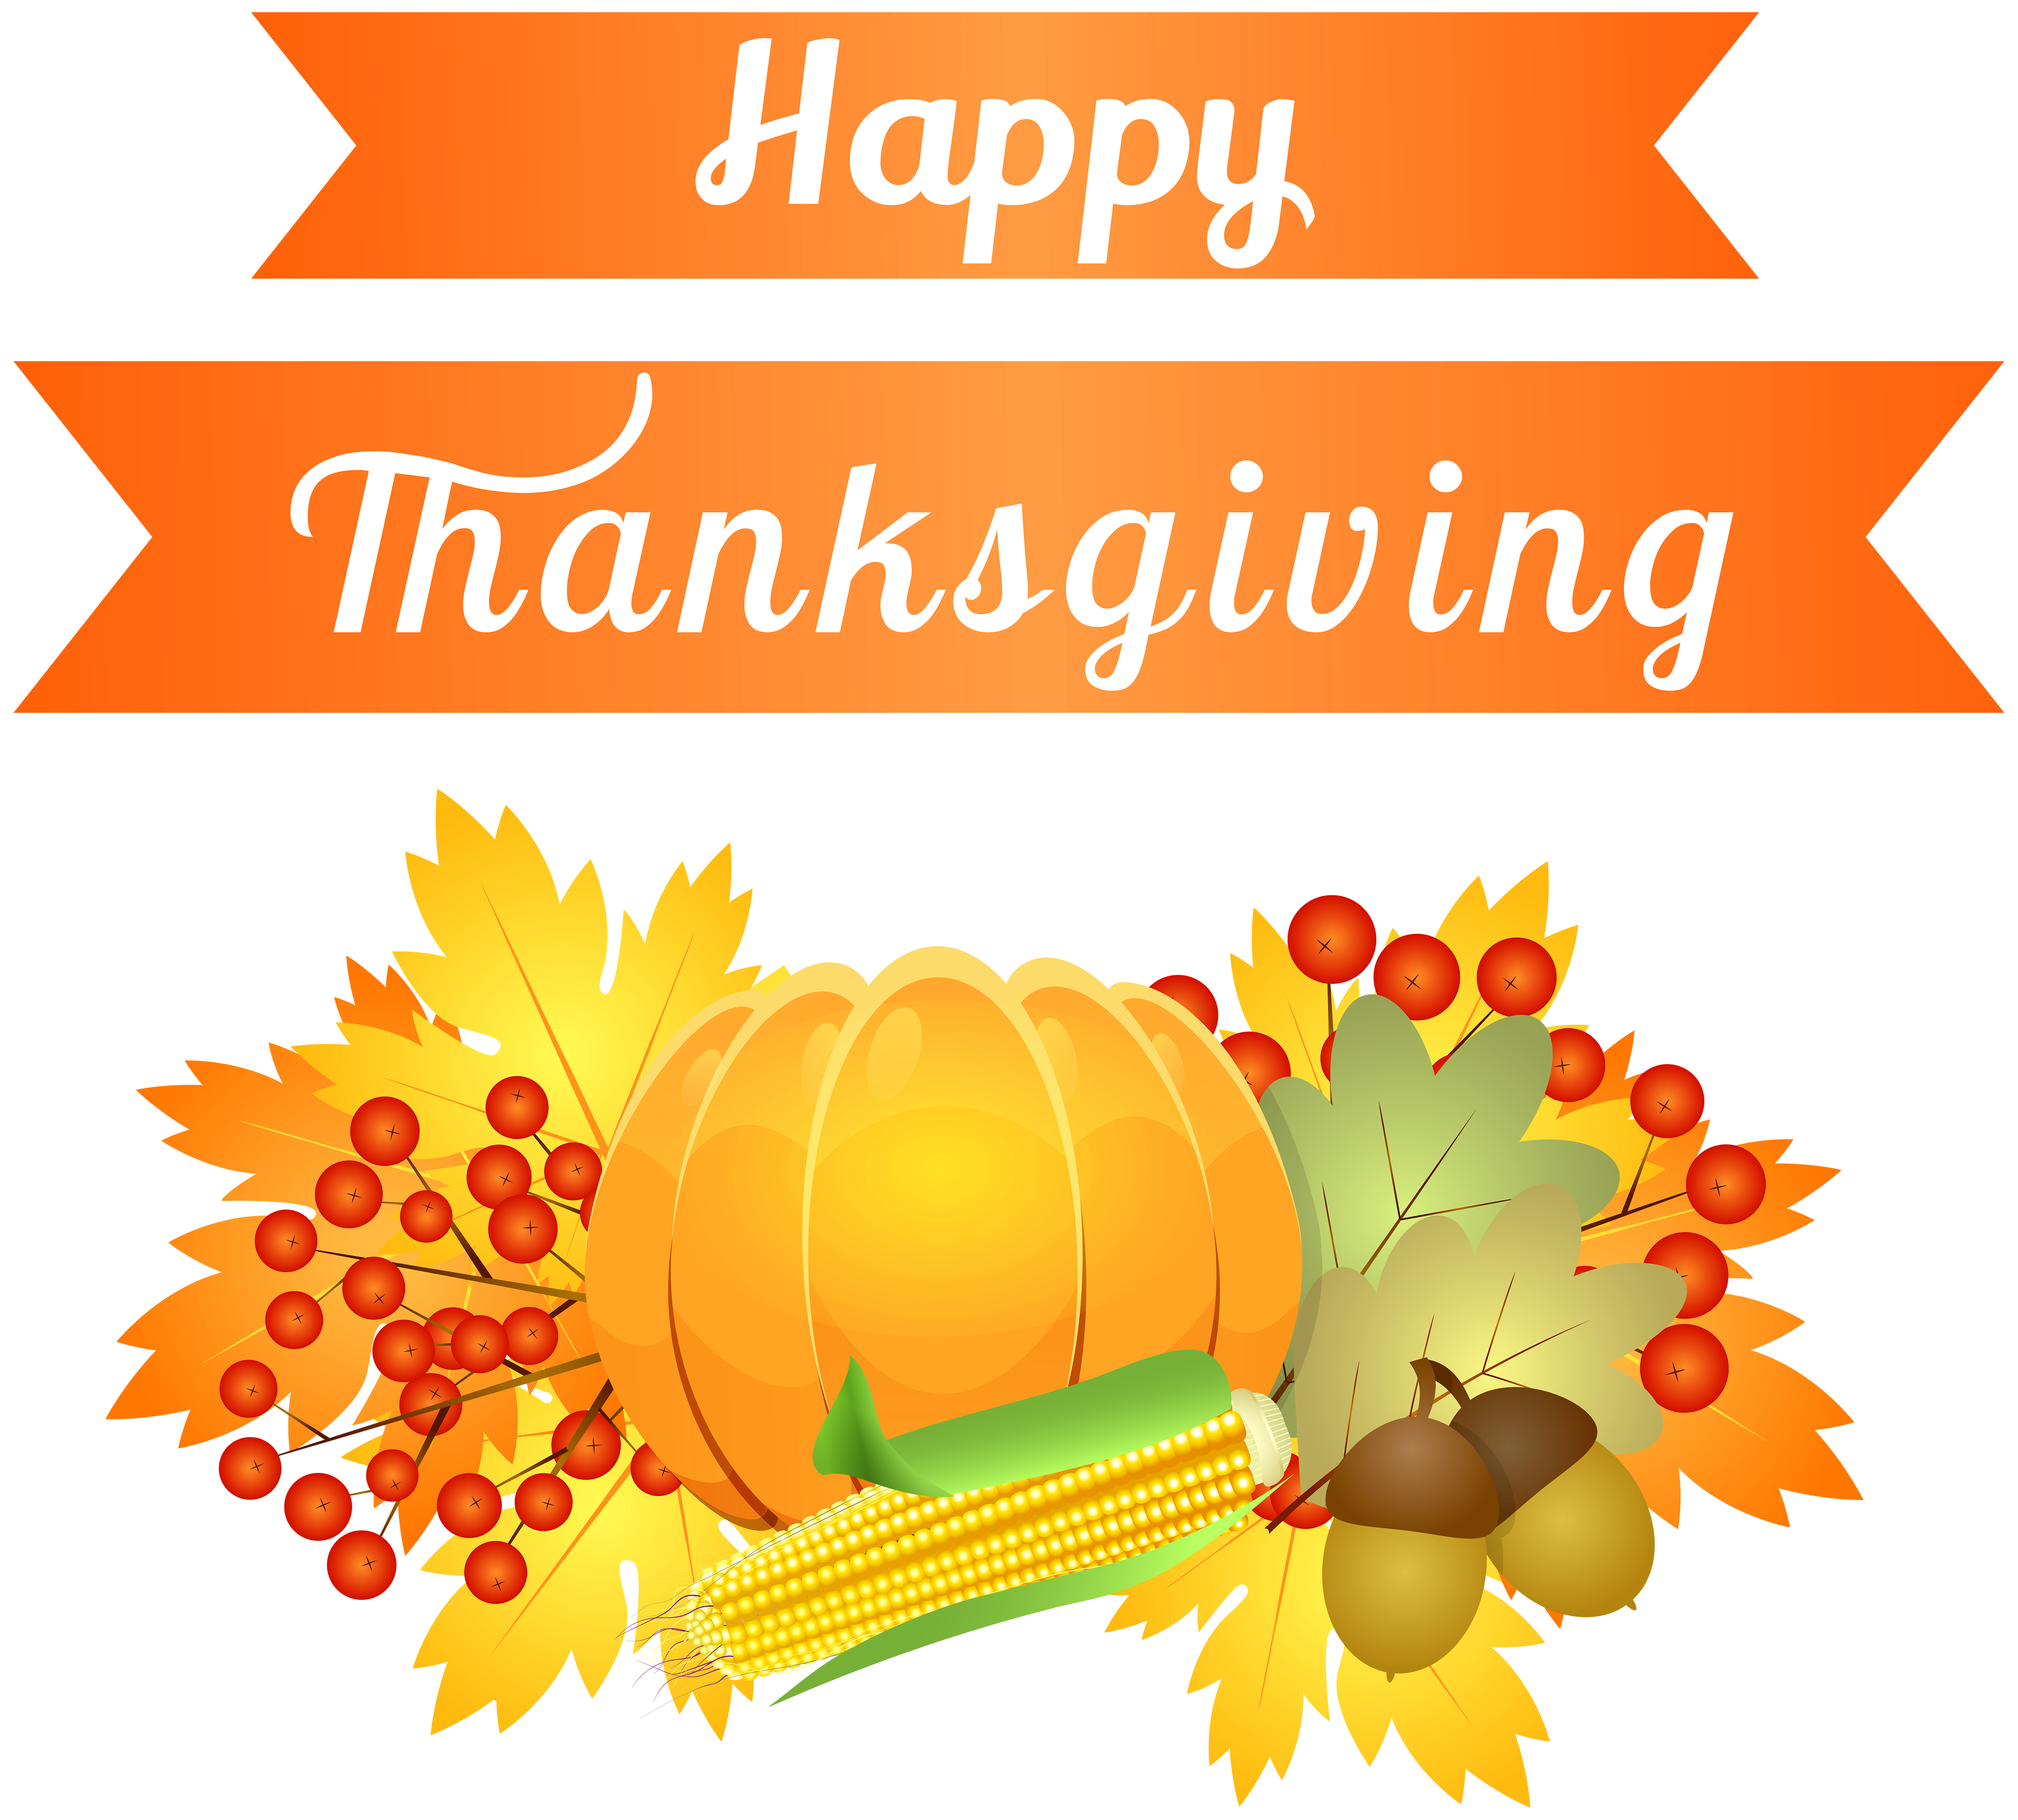 Happy decoration clipart image. Thanksgiving png images